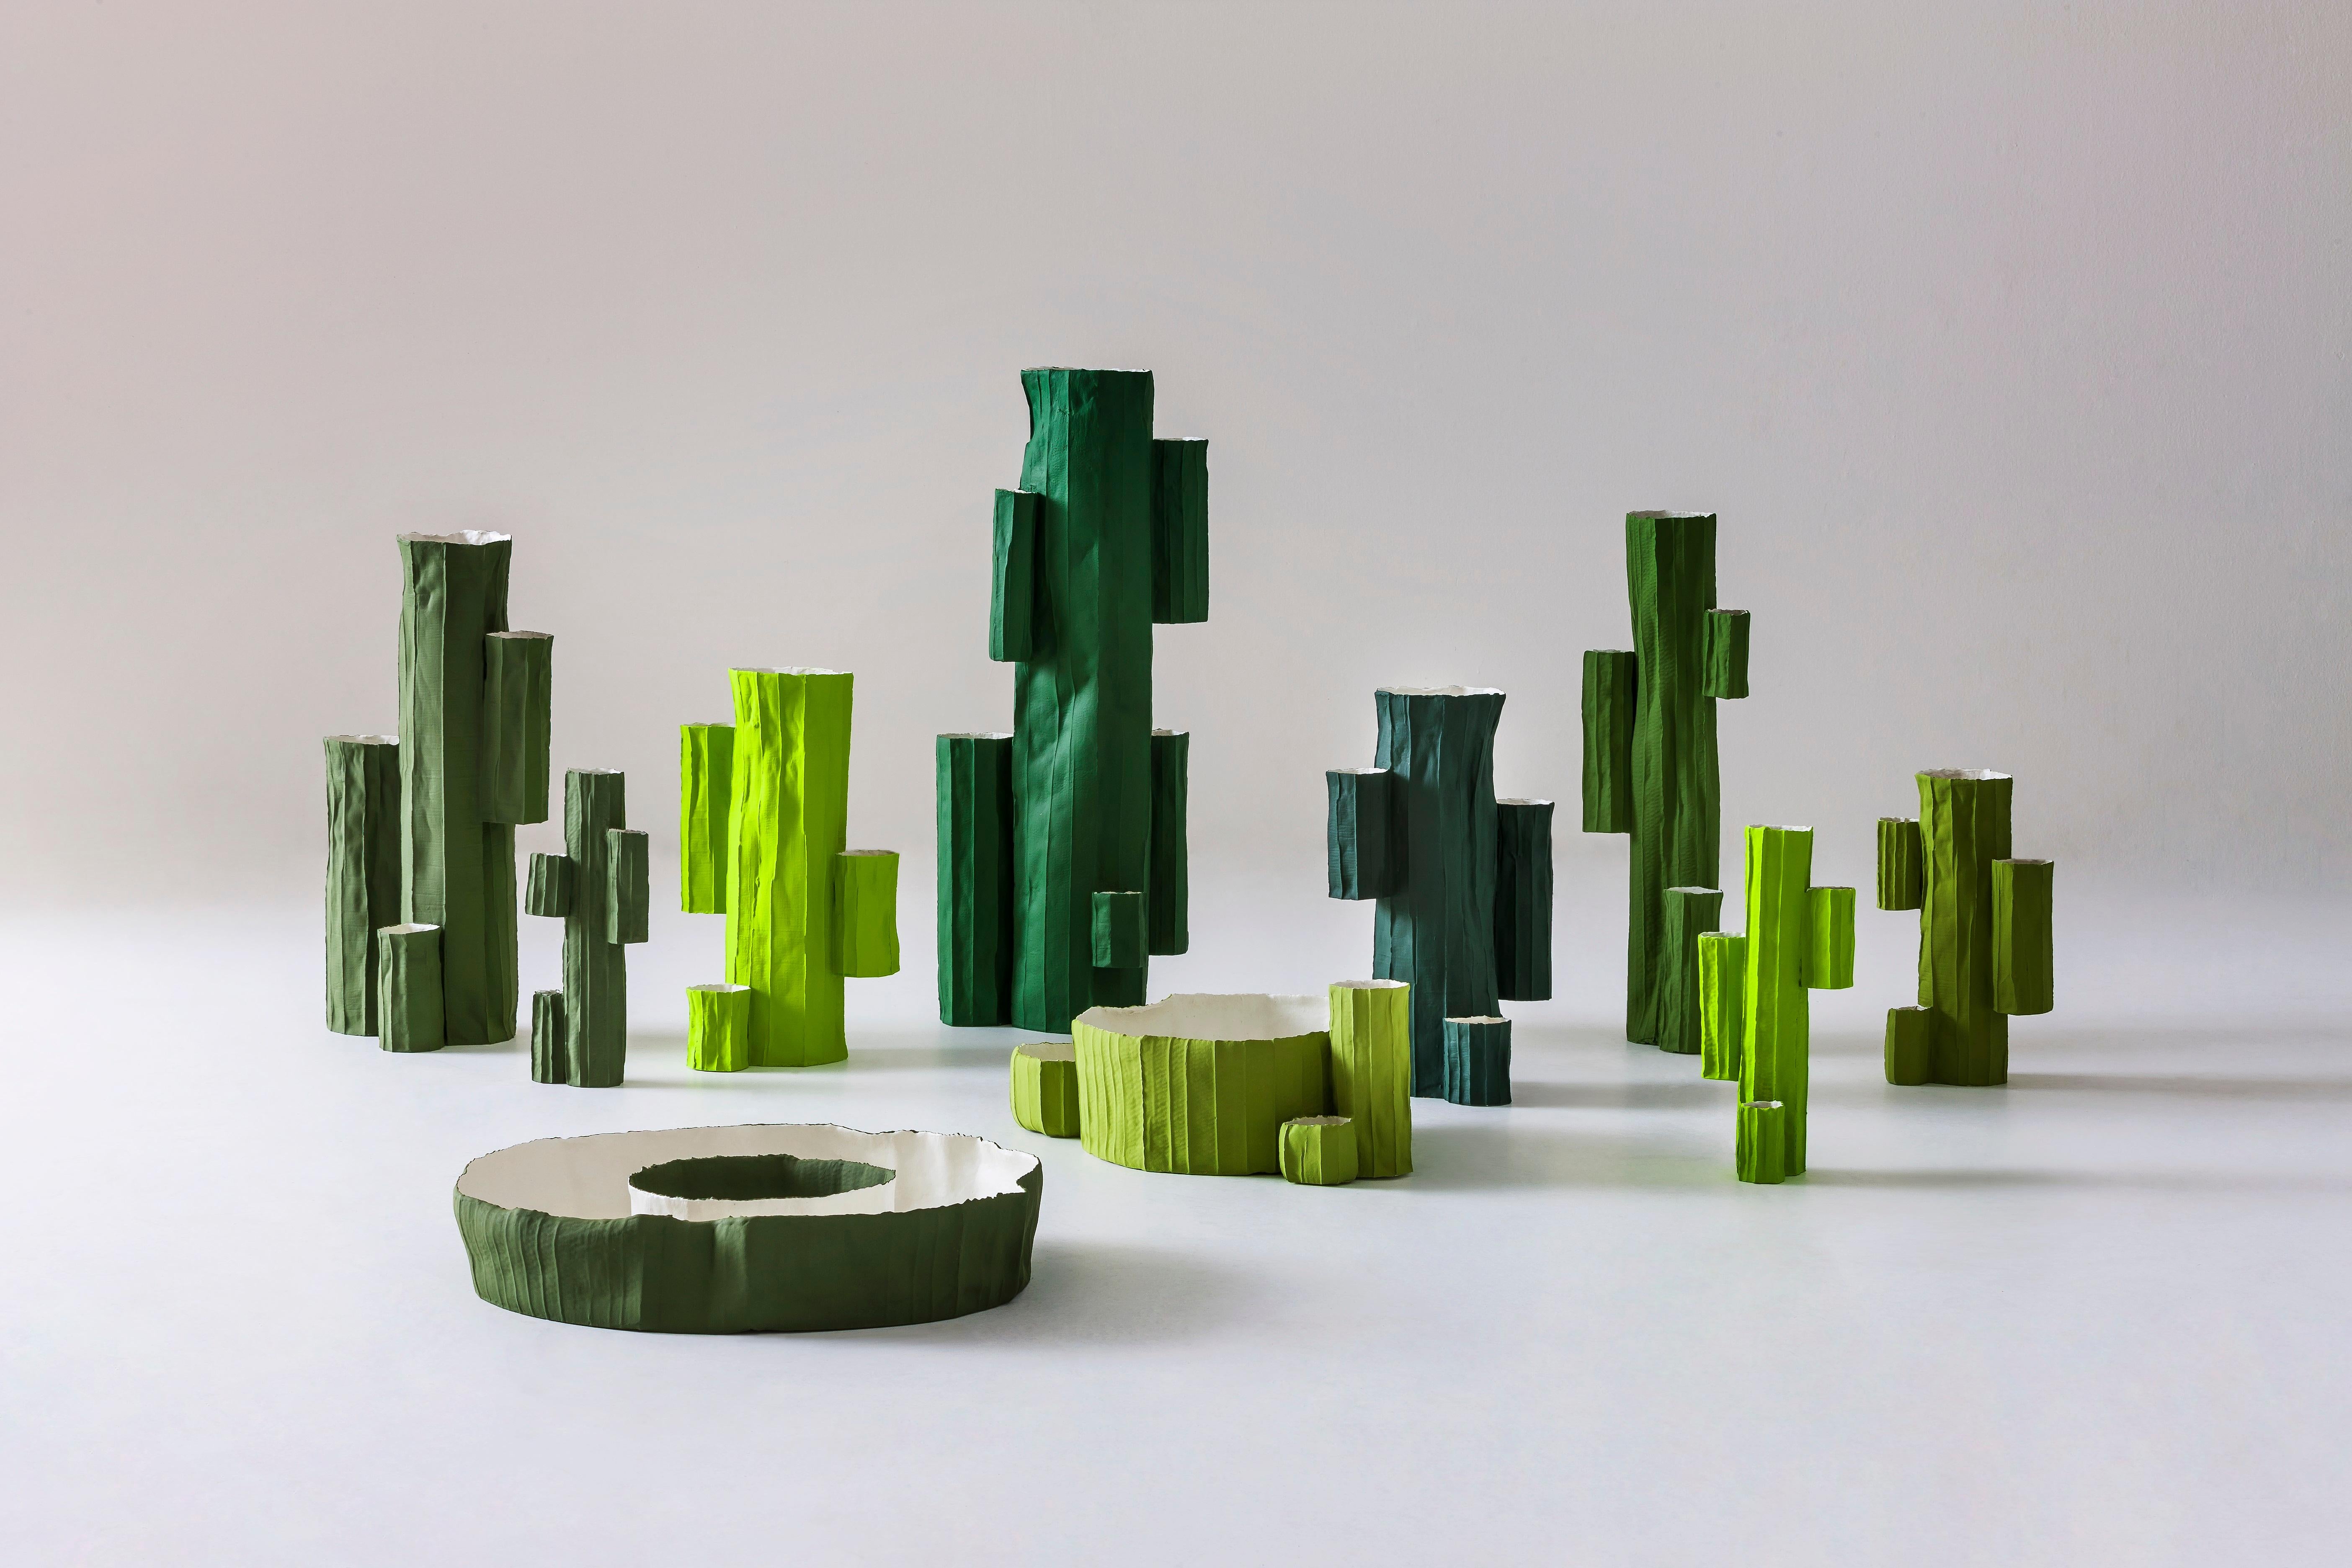 This unique vase was handcrafted using paper clay, a clay-base mixture enriched with natural fibers. The final firing phase results in the distinctive, light-yet-strong appearance and captivating look. Handcrafted and hand painted in vivid green,